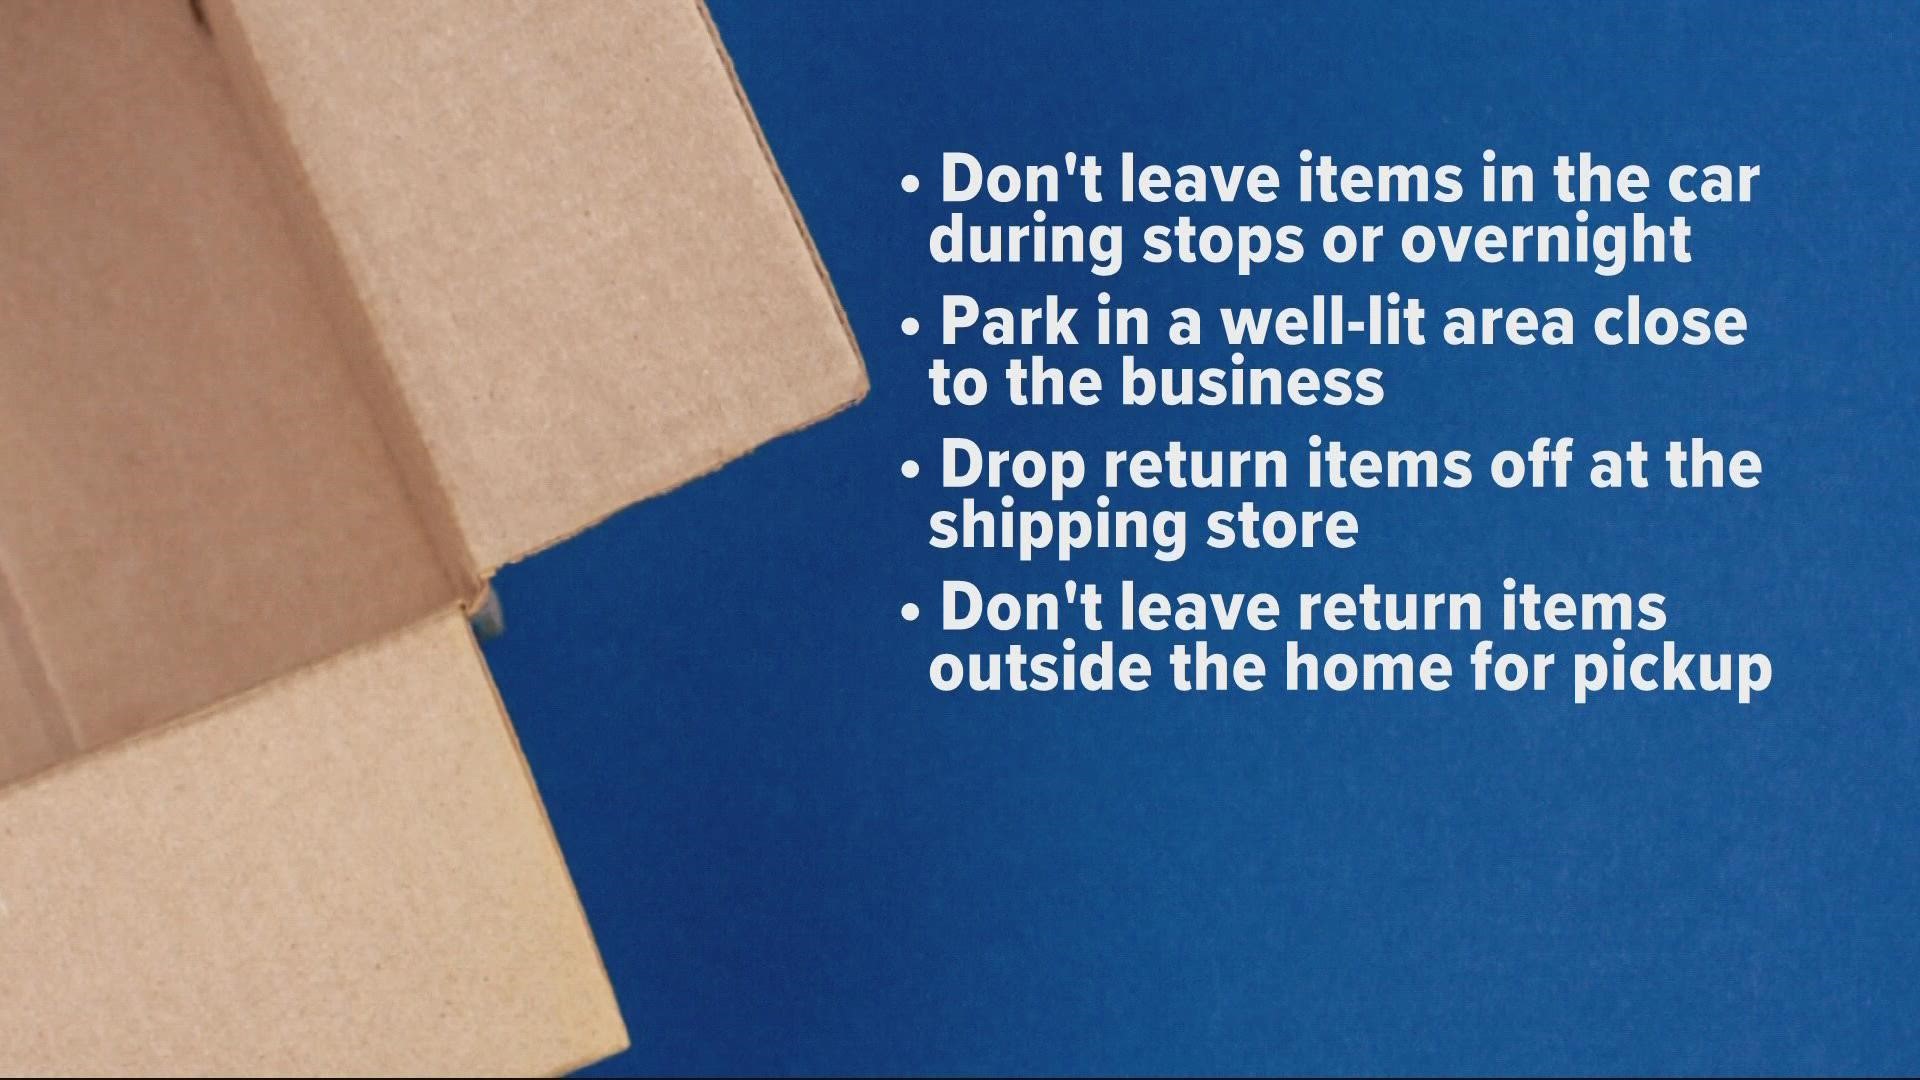 Experts say leaving out boxes of high-priced items for anyone to see can be dangerous. Flatten boxes and don't leave the items visible in the car.